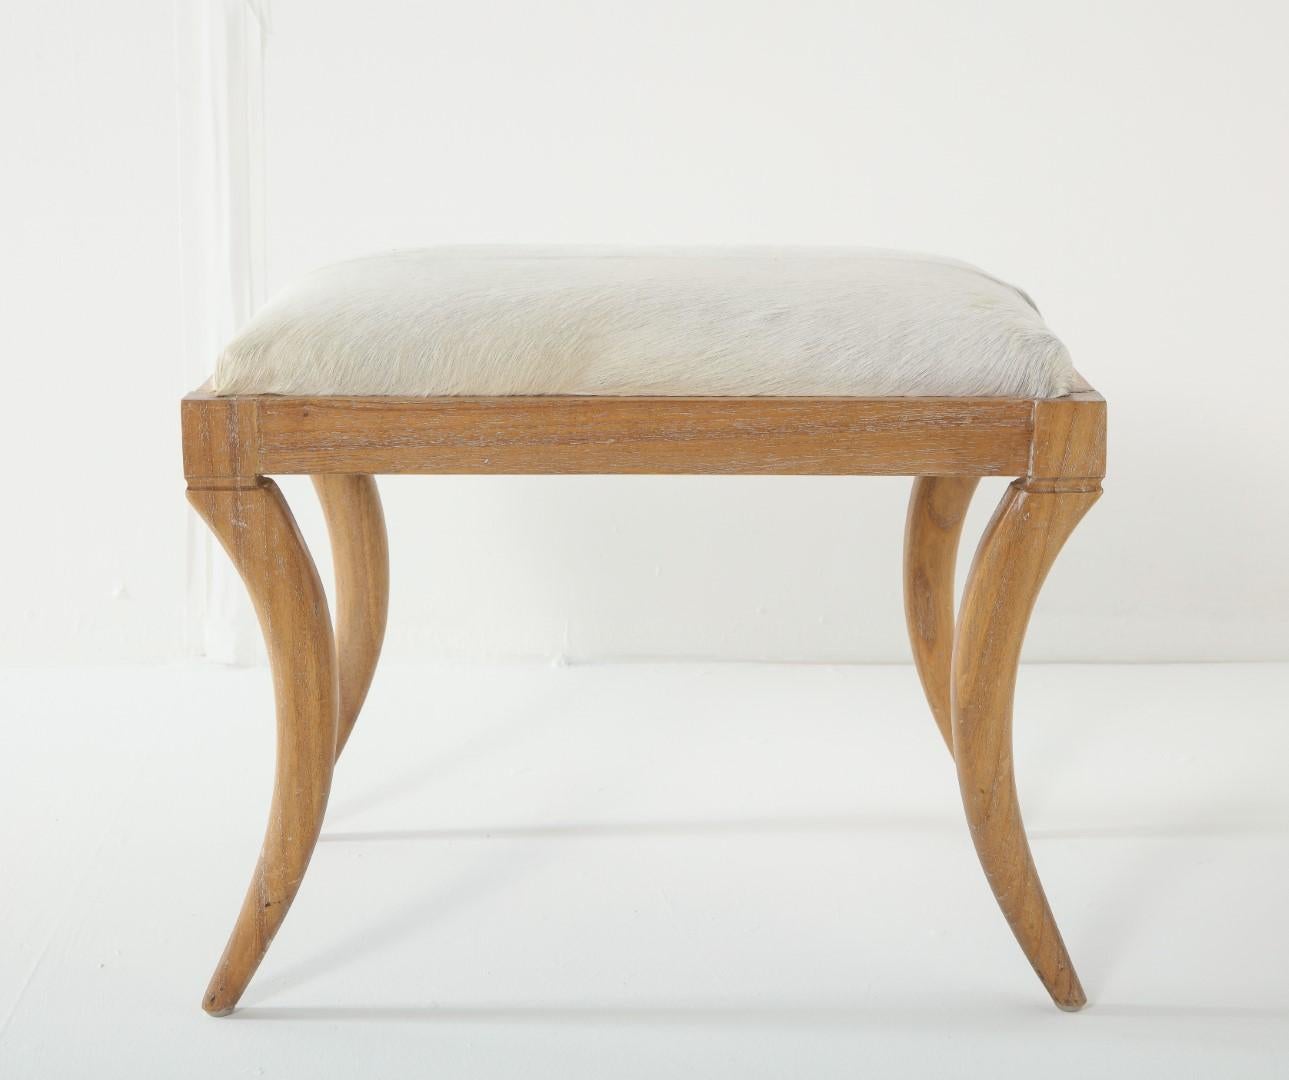 Cerused oak saber-leg ottoman with white pony hide seat, in the style of Jean-Michel Frank.